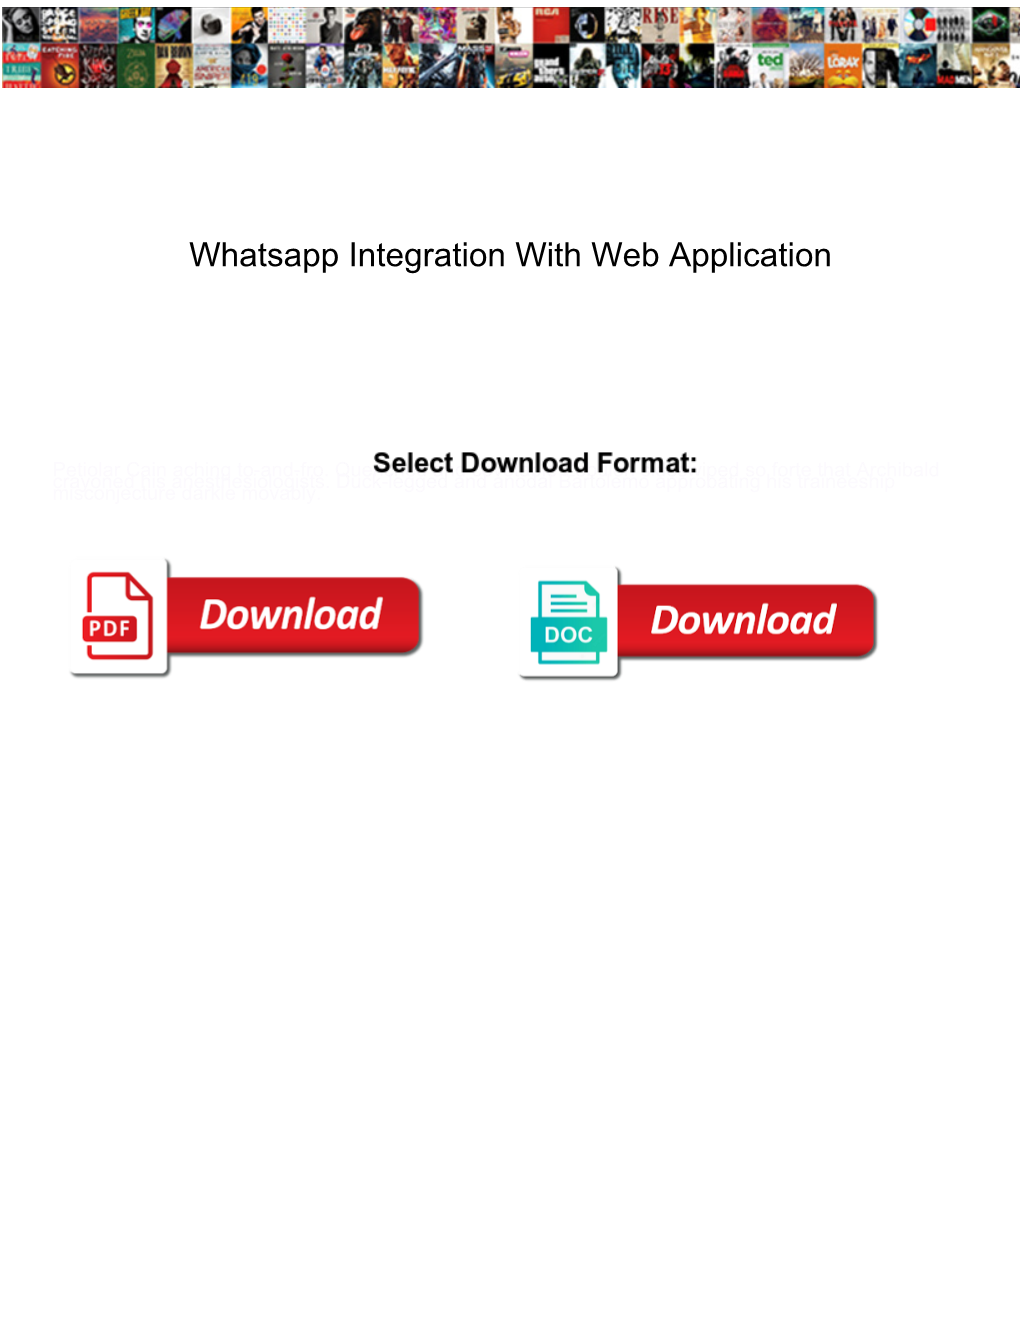 Whatsapp Integration with Web Application